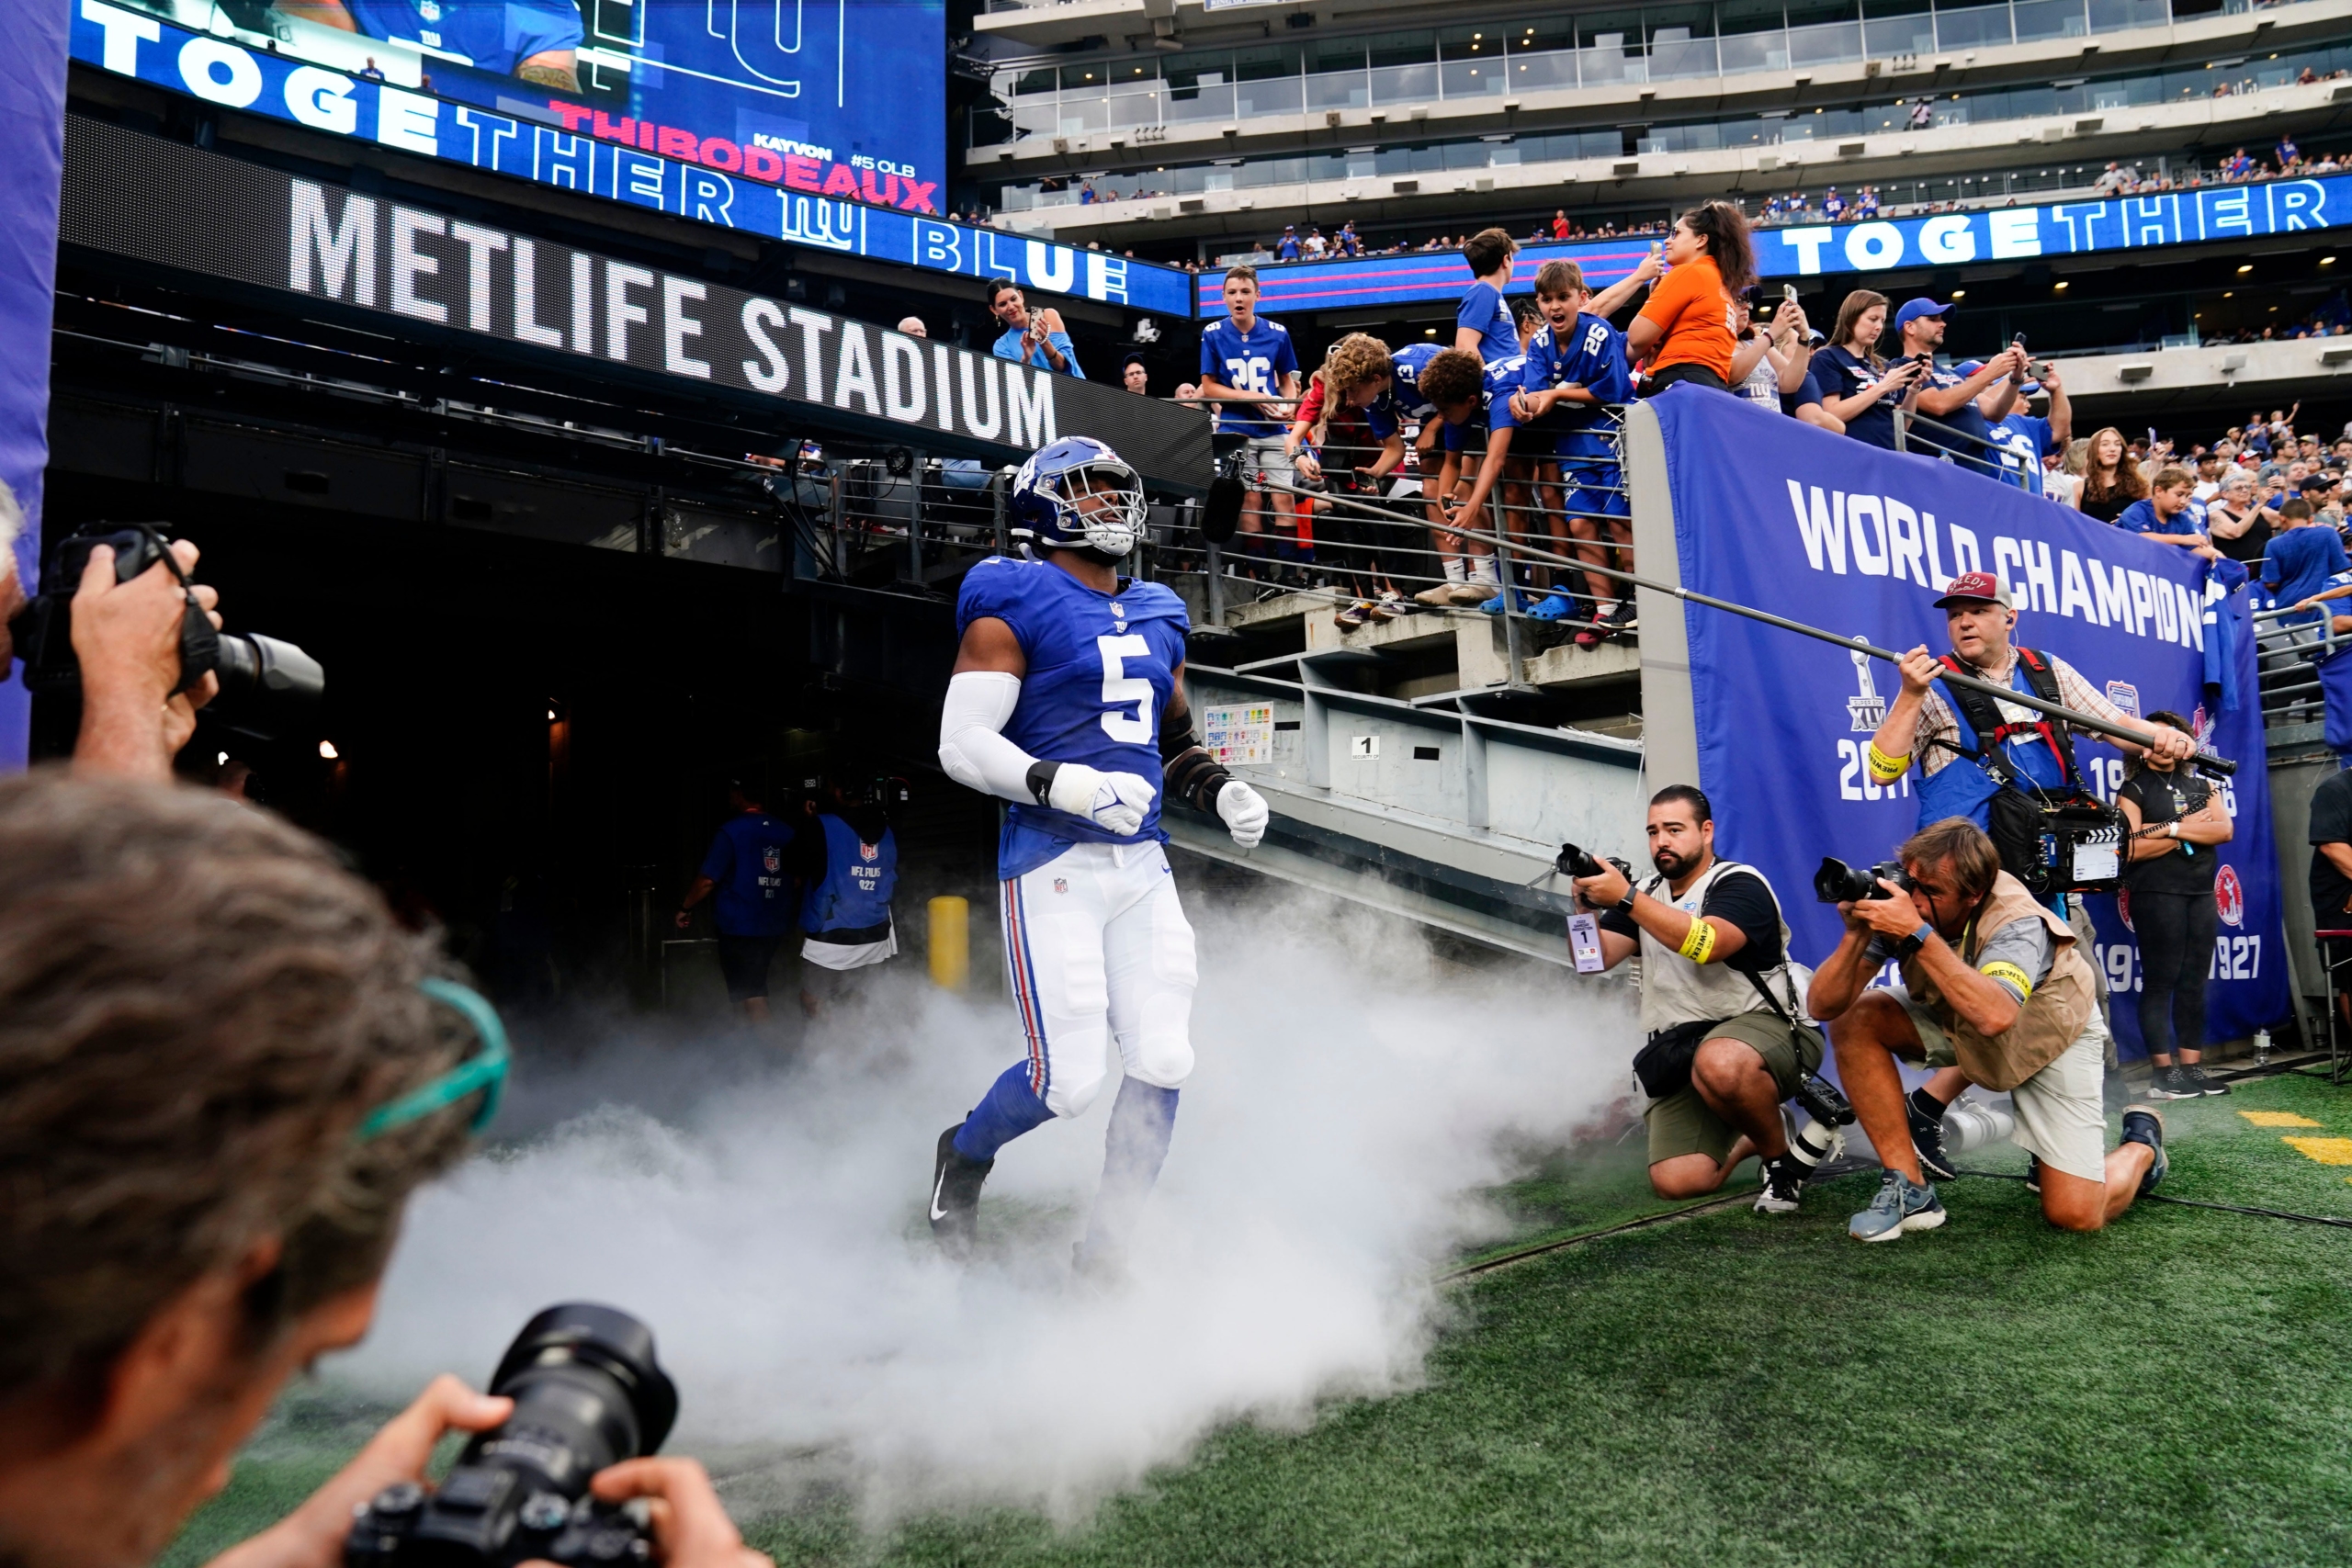 New York Giants: 3 major storylines to watch vs Dallas Cowboys on Monday